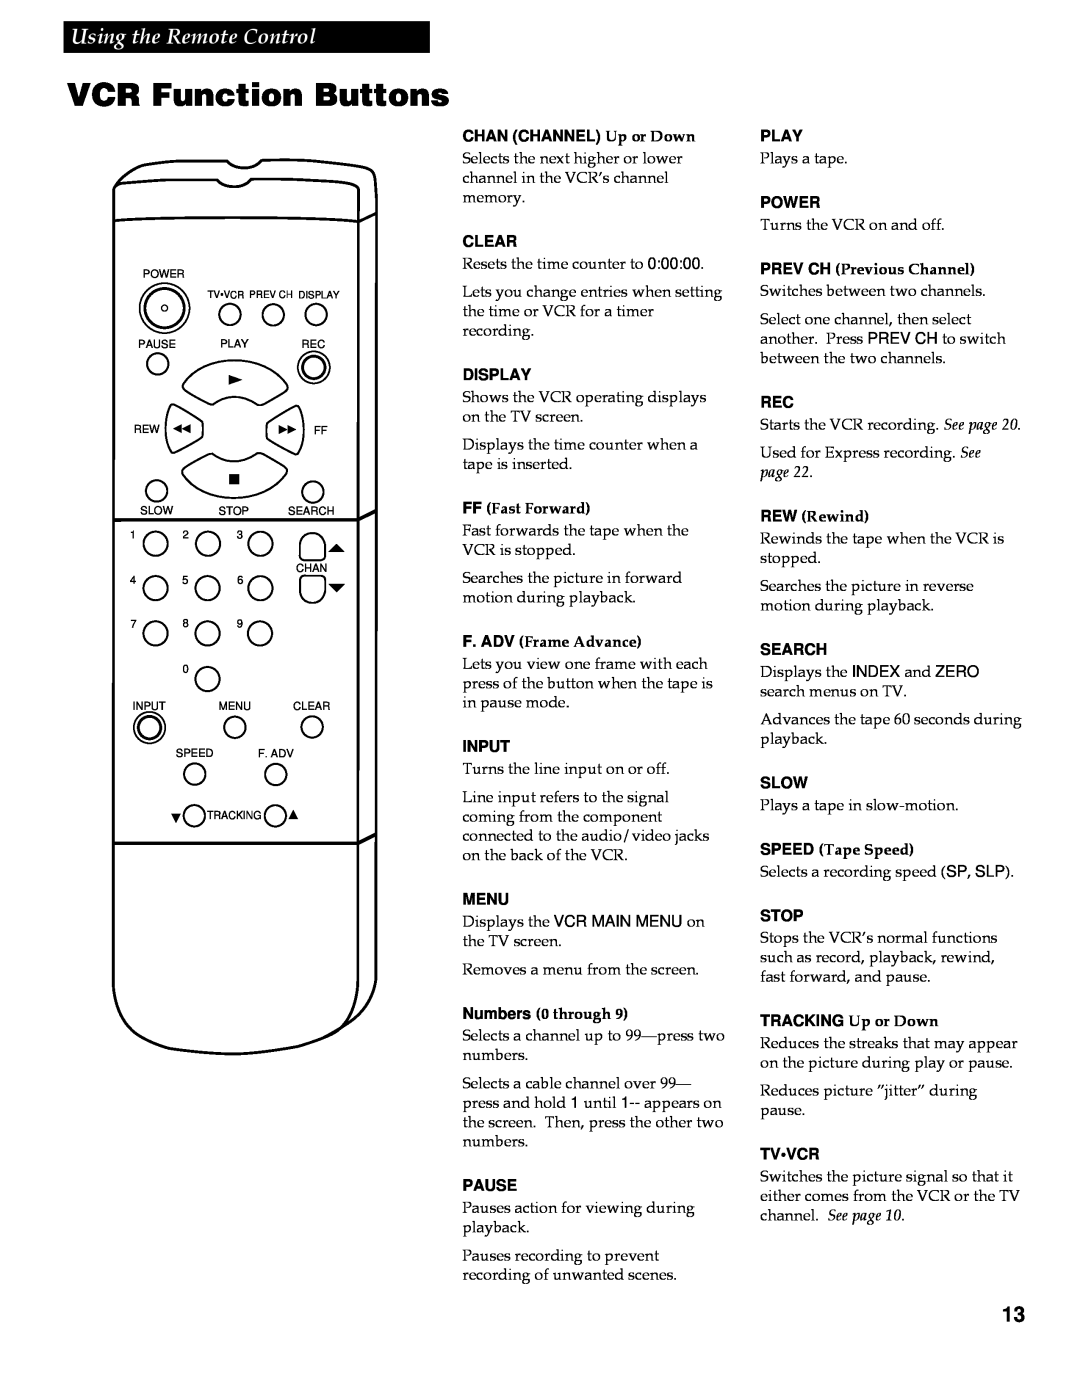 RCA VR642HF manual VCR Function Buttons, Using the Remote Control 